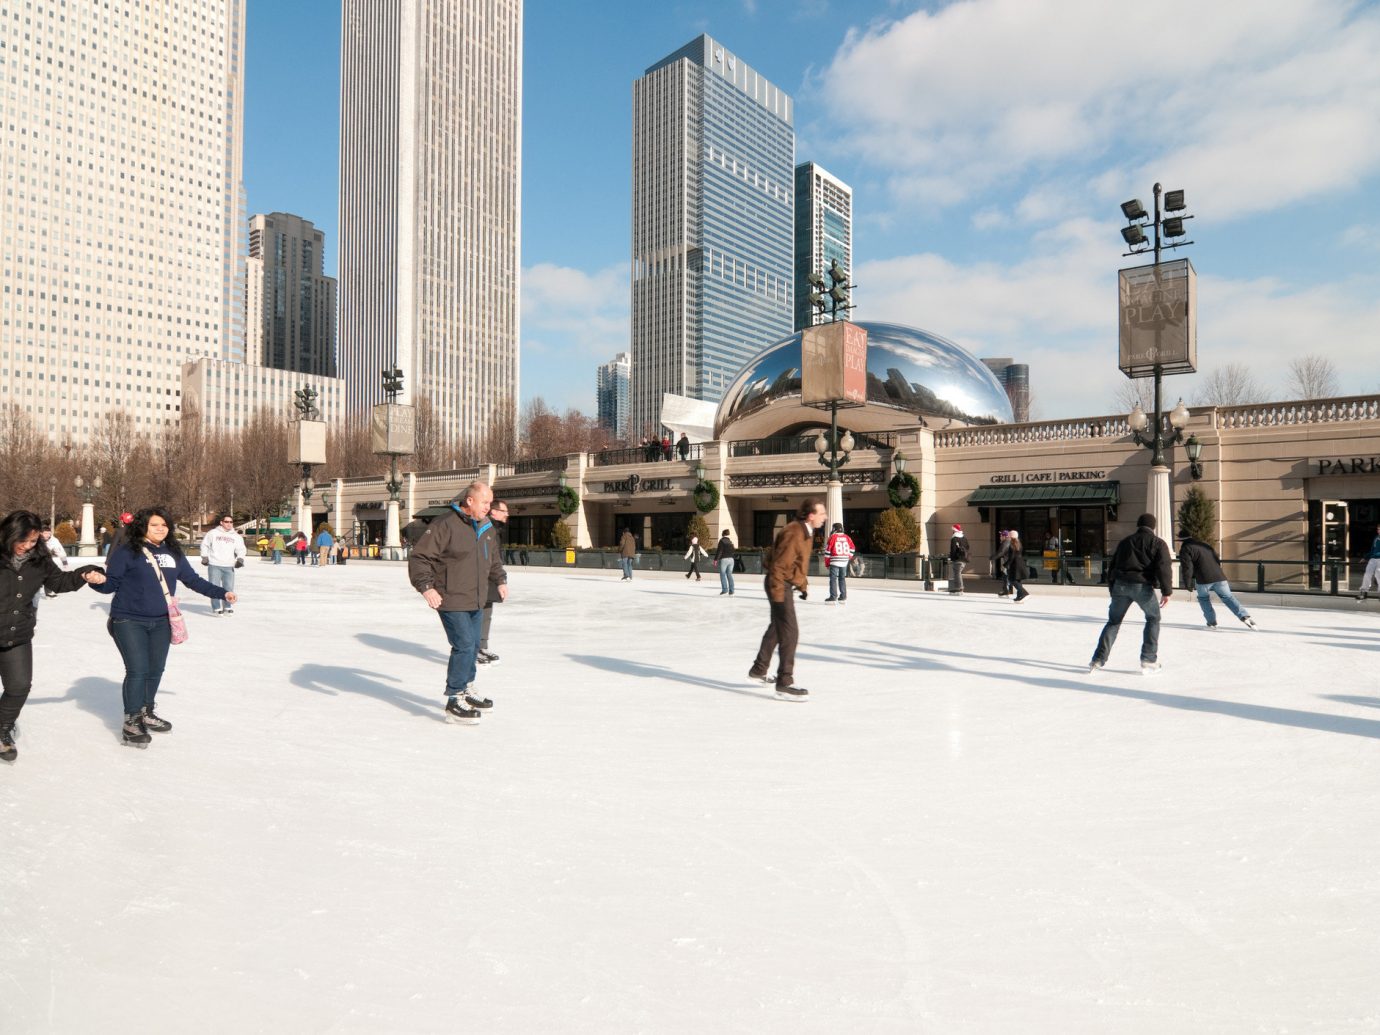 Trip Ideas Weekend Getaways outdoor sky urban area ice rink Winter Ice Skating City rink building ice daytime Downtown skating people recreation fun plaza winter sport snow tourism tree leisure freezing vacation pedestrian town square